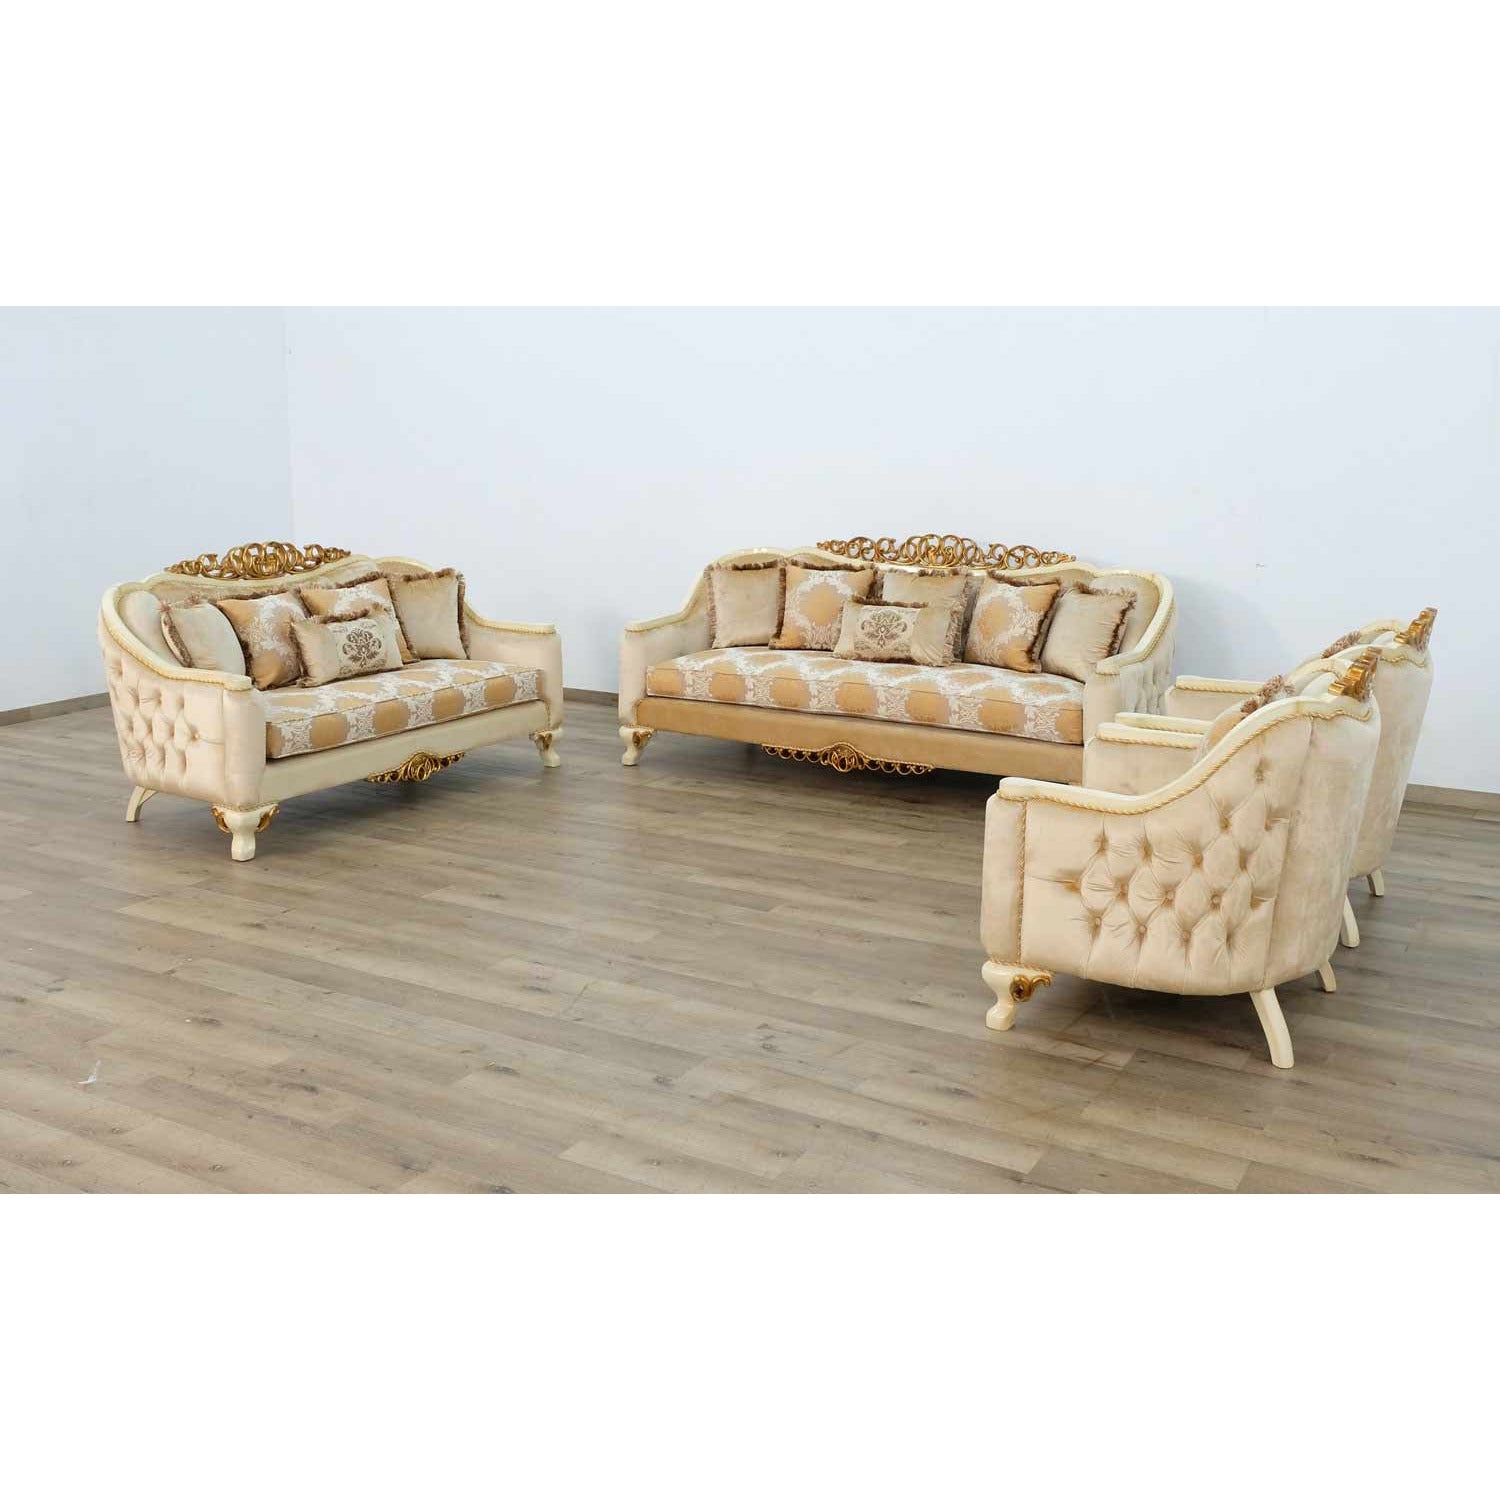 European Furniture - Angelica 3 Piece Living Room Set in Brown & Gold - 45352-3SET - New Star Living